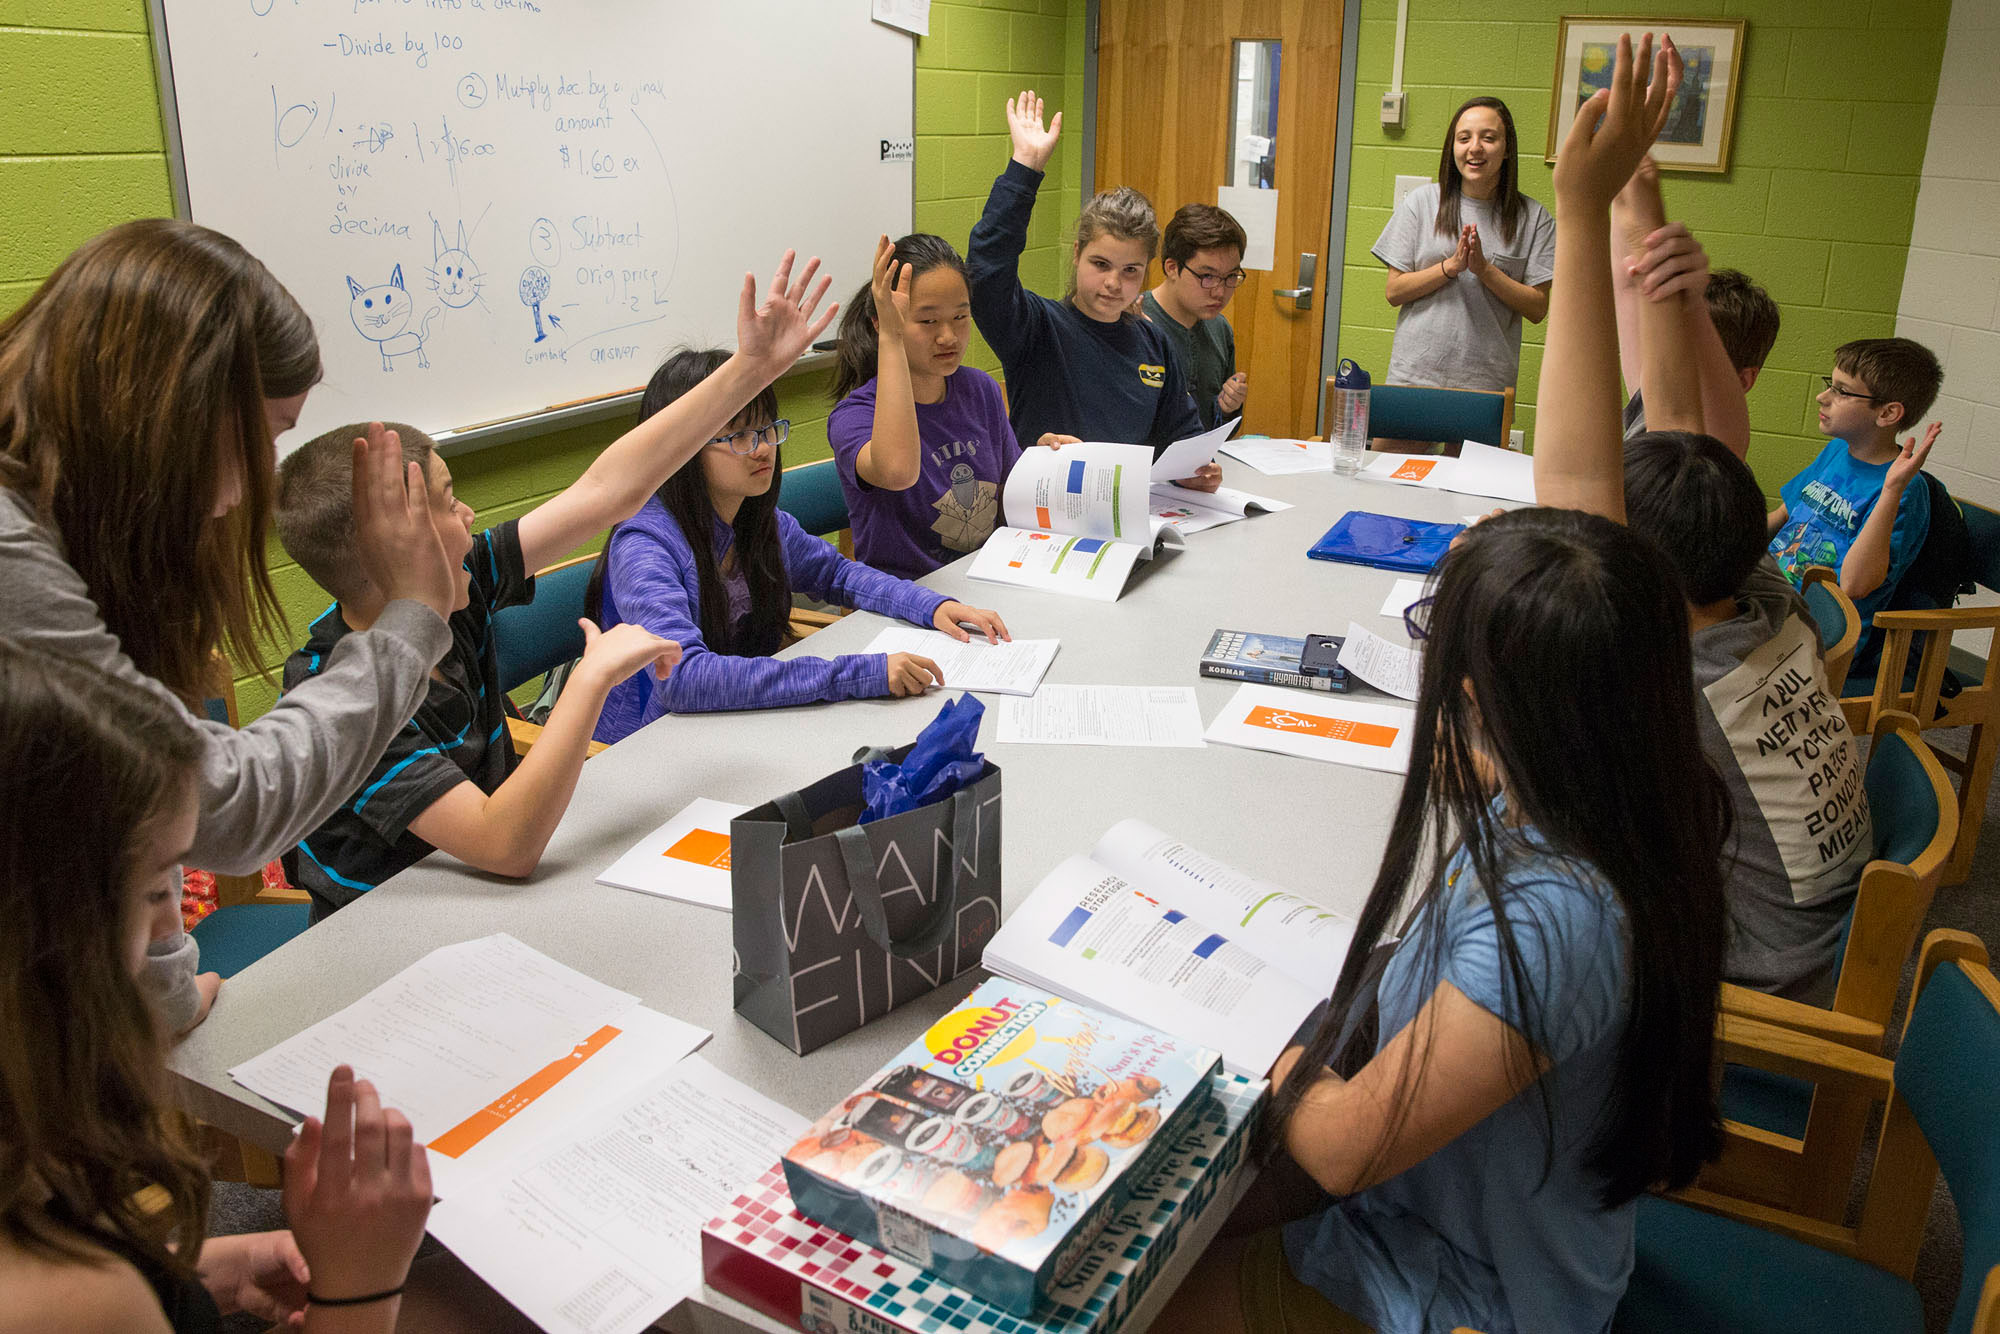 Second-year UVA student Victoria Farris (standing) coaches Sutherland Middle School students in the Charlottesville Debate League that Parisa Sadeghi started several years ago. (Photo by Dan Addison) 